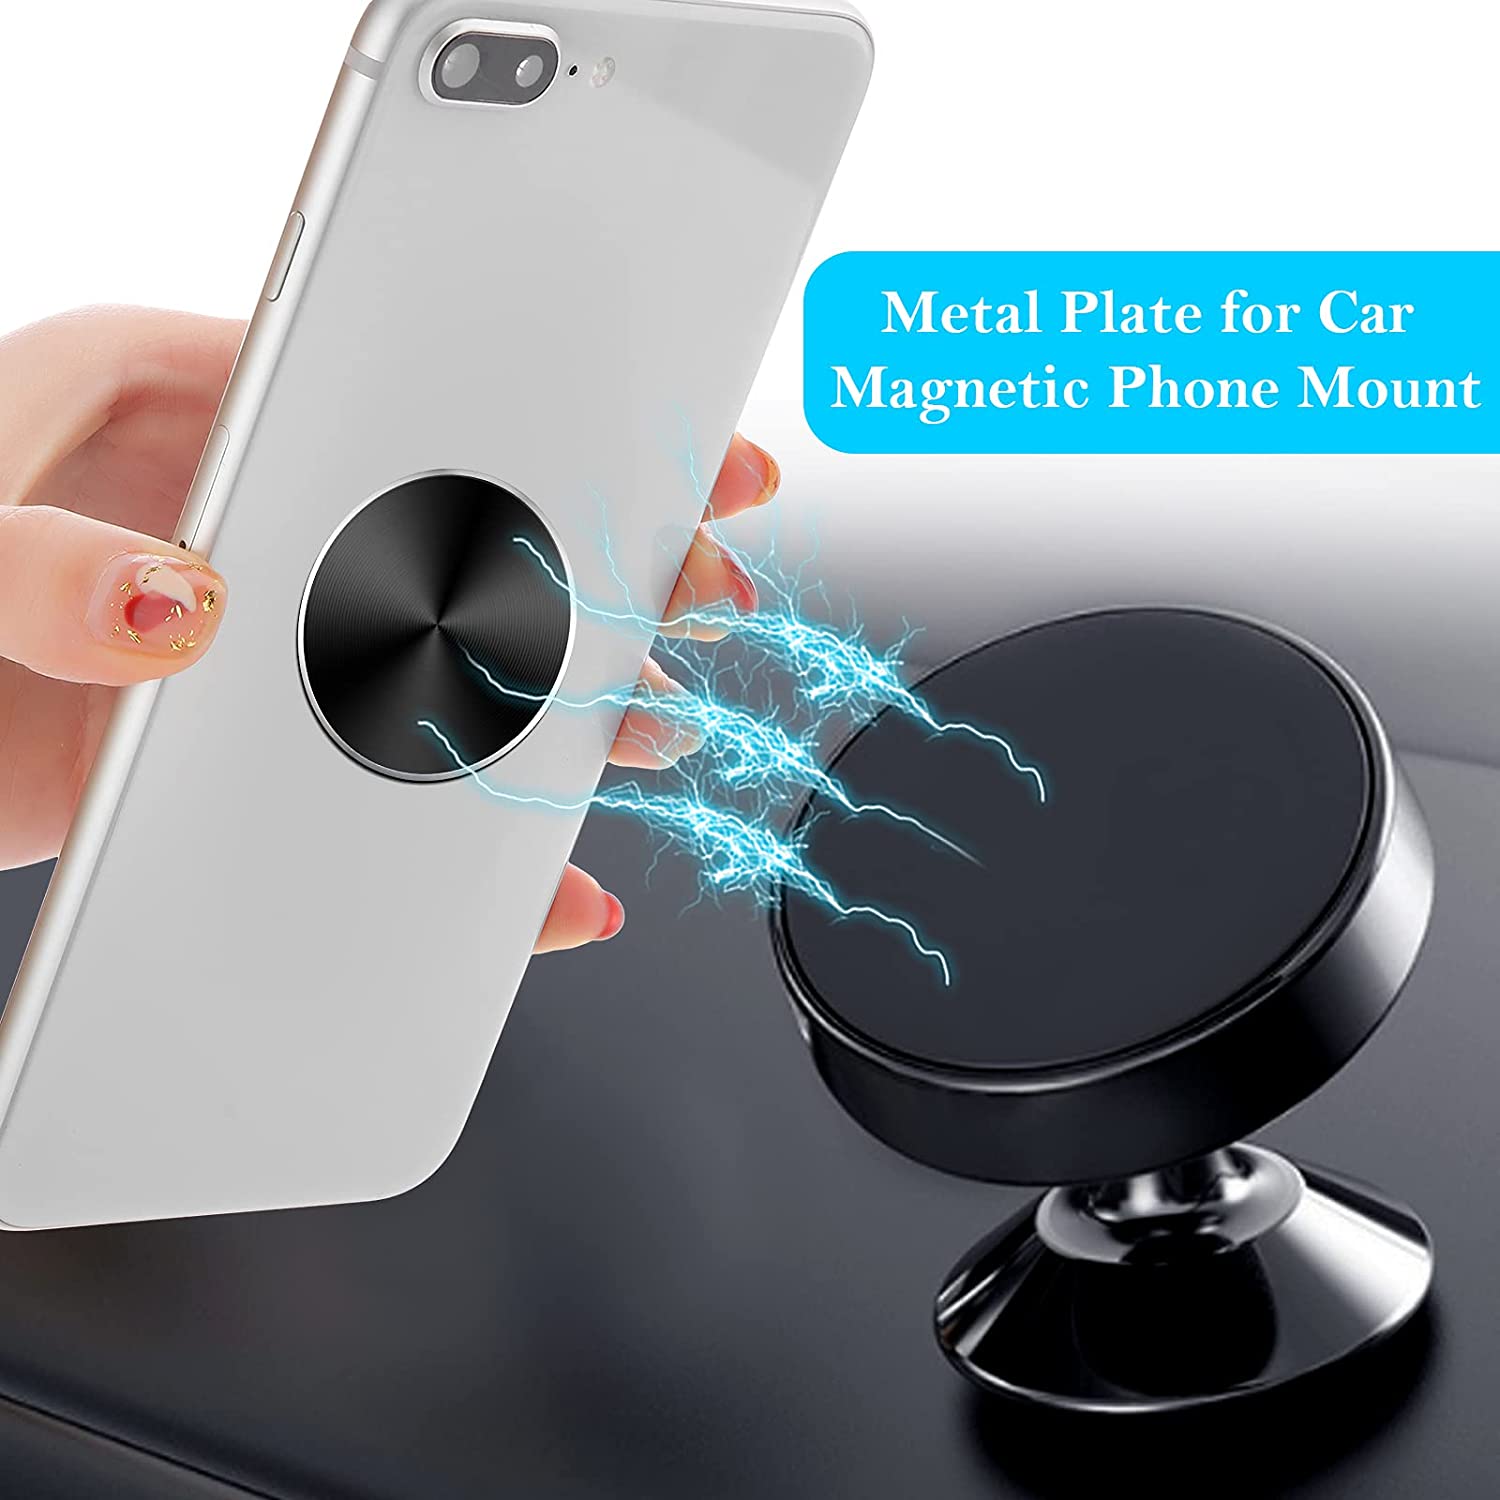 XMXCZKJ Metal Plate Disk For Magnet Car Phone Holder iron Sheet Sticker For Magnetic Mobile Phone Holder Car Stand Mount